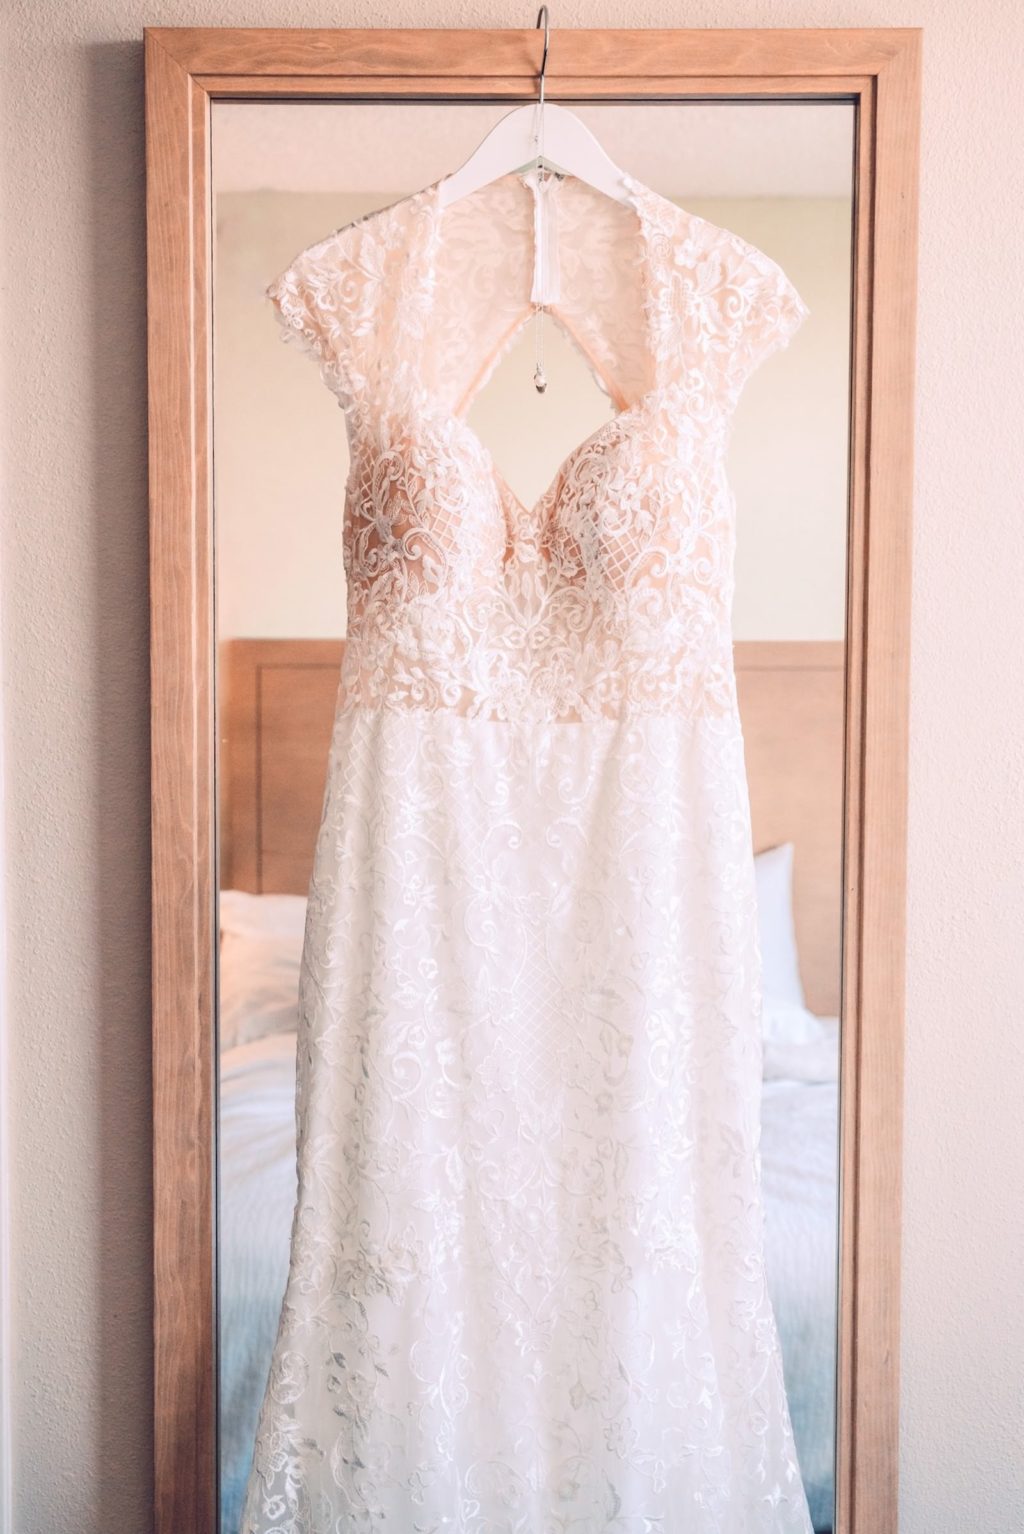 Romantic Bride Cap Sleeve Nude Lace Bodice and White Lace Skirt Wedding Dress | Tampa Bay Wedding Photographer Bonnie Newman Creative | Wedding Dress Shop Truly Forever Bridal